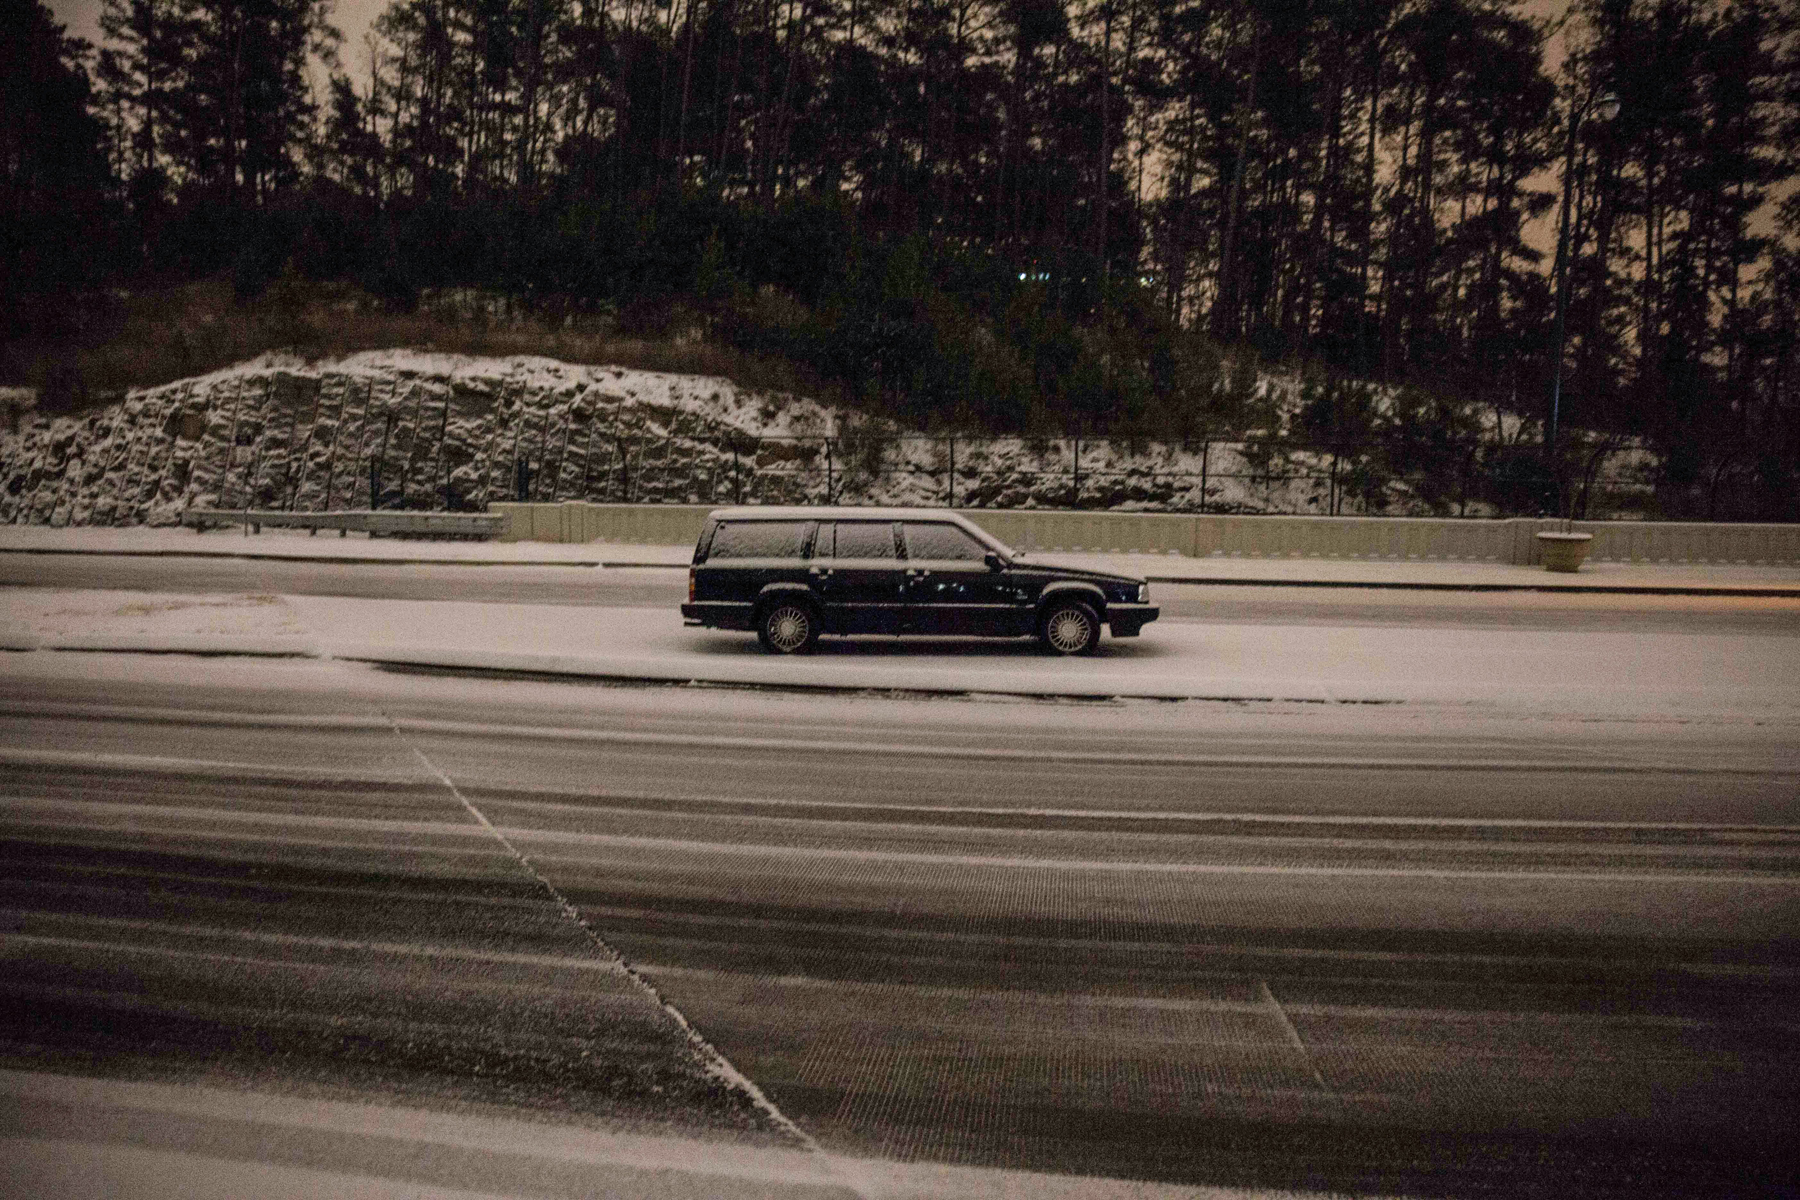 A car sits abandoned on Peachtree Center Parkway, Tuesday evening, Jan. 28, 2014, in Dunwoody, Ga.